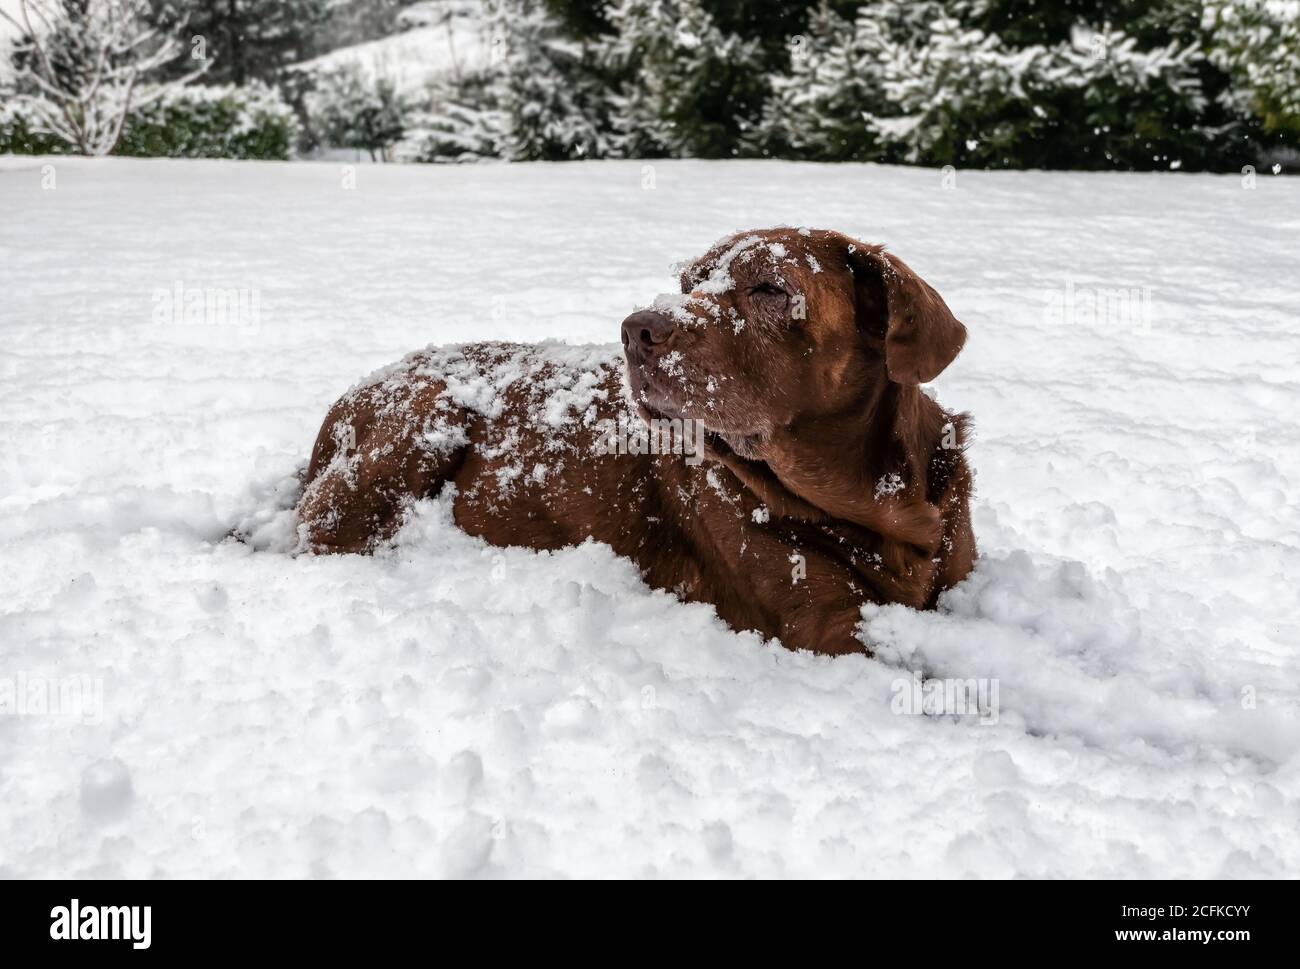 Old Chocolate Labrador Retriever dog lying down in the snow under the snowfall. Stock Photo